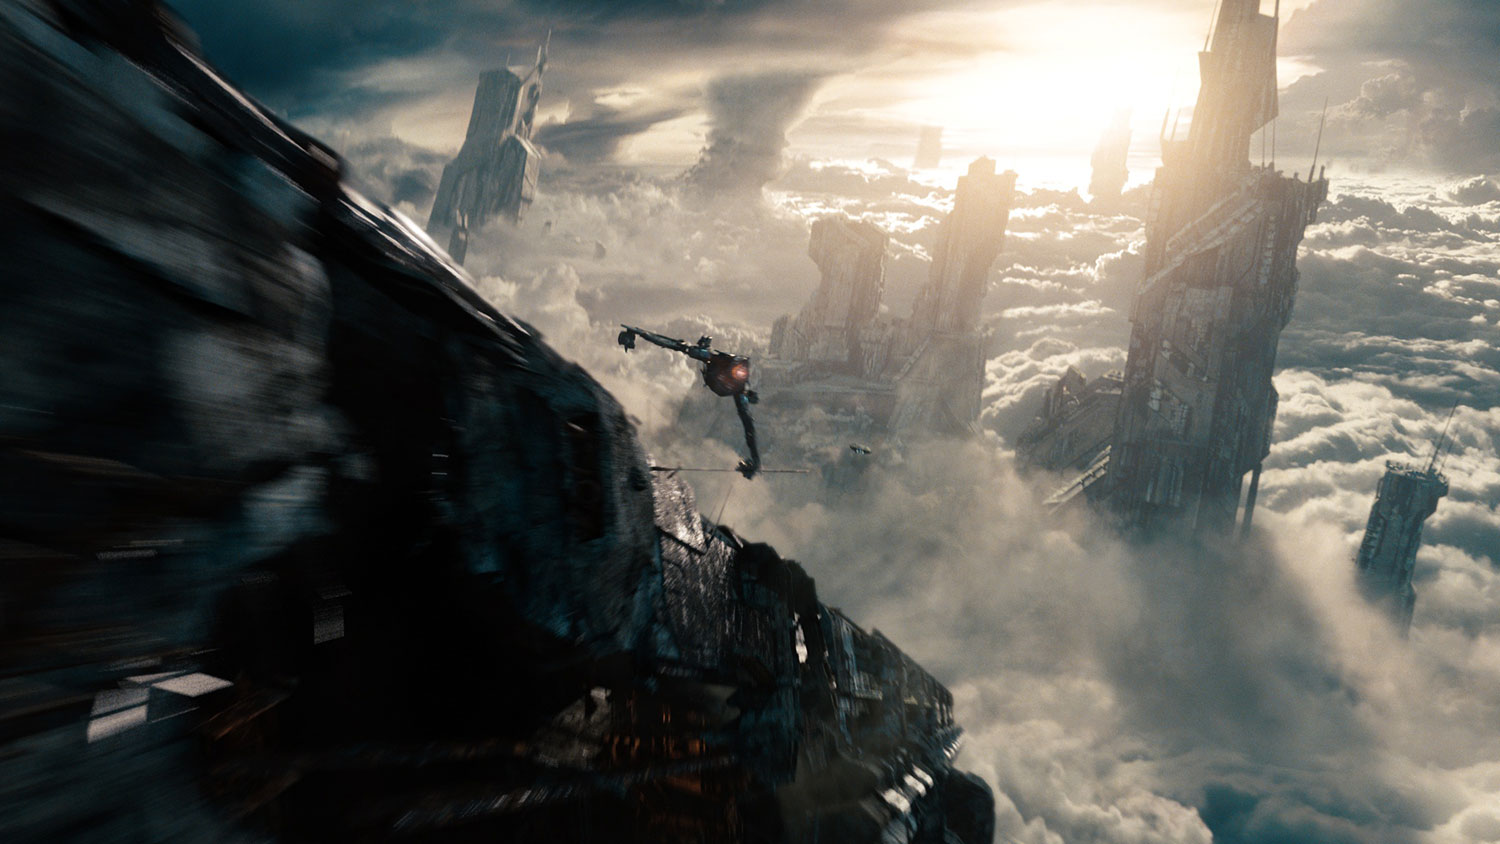 shielding your eyes from the glaring lights of star trek into darkness 004